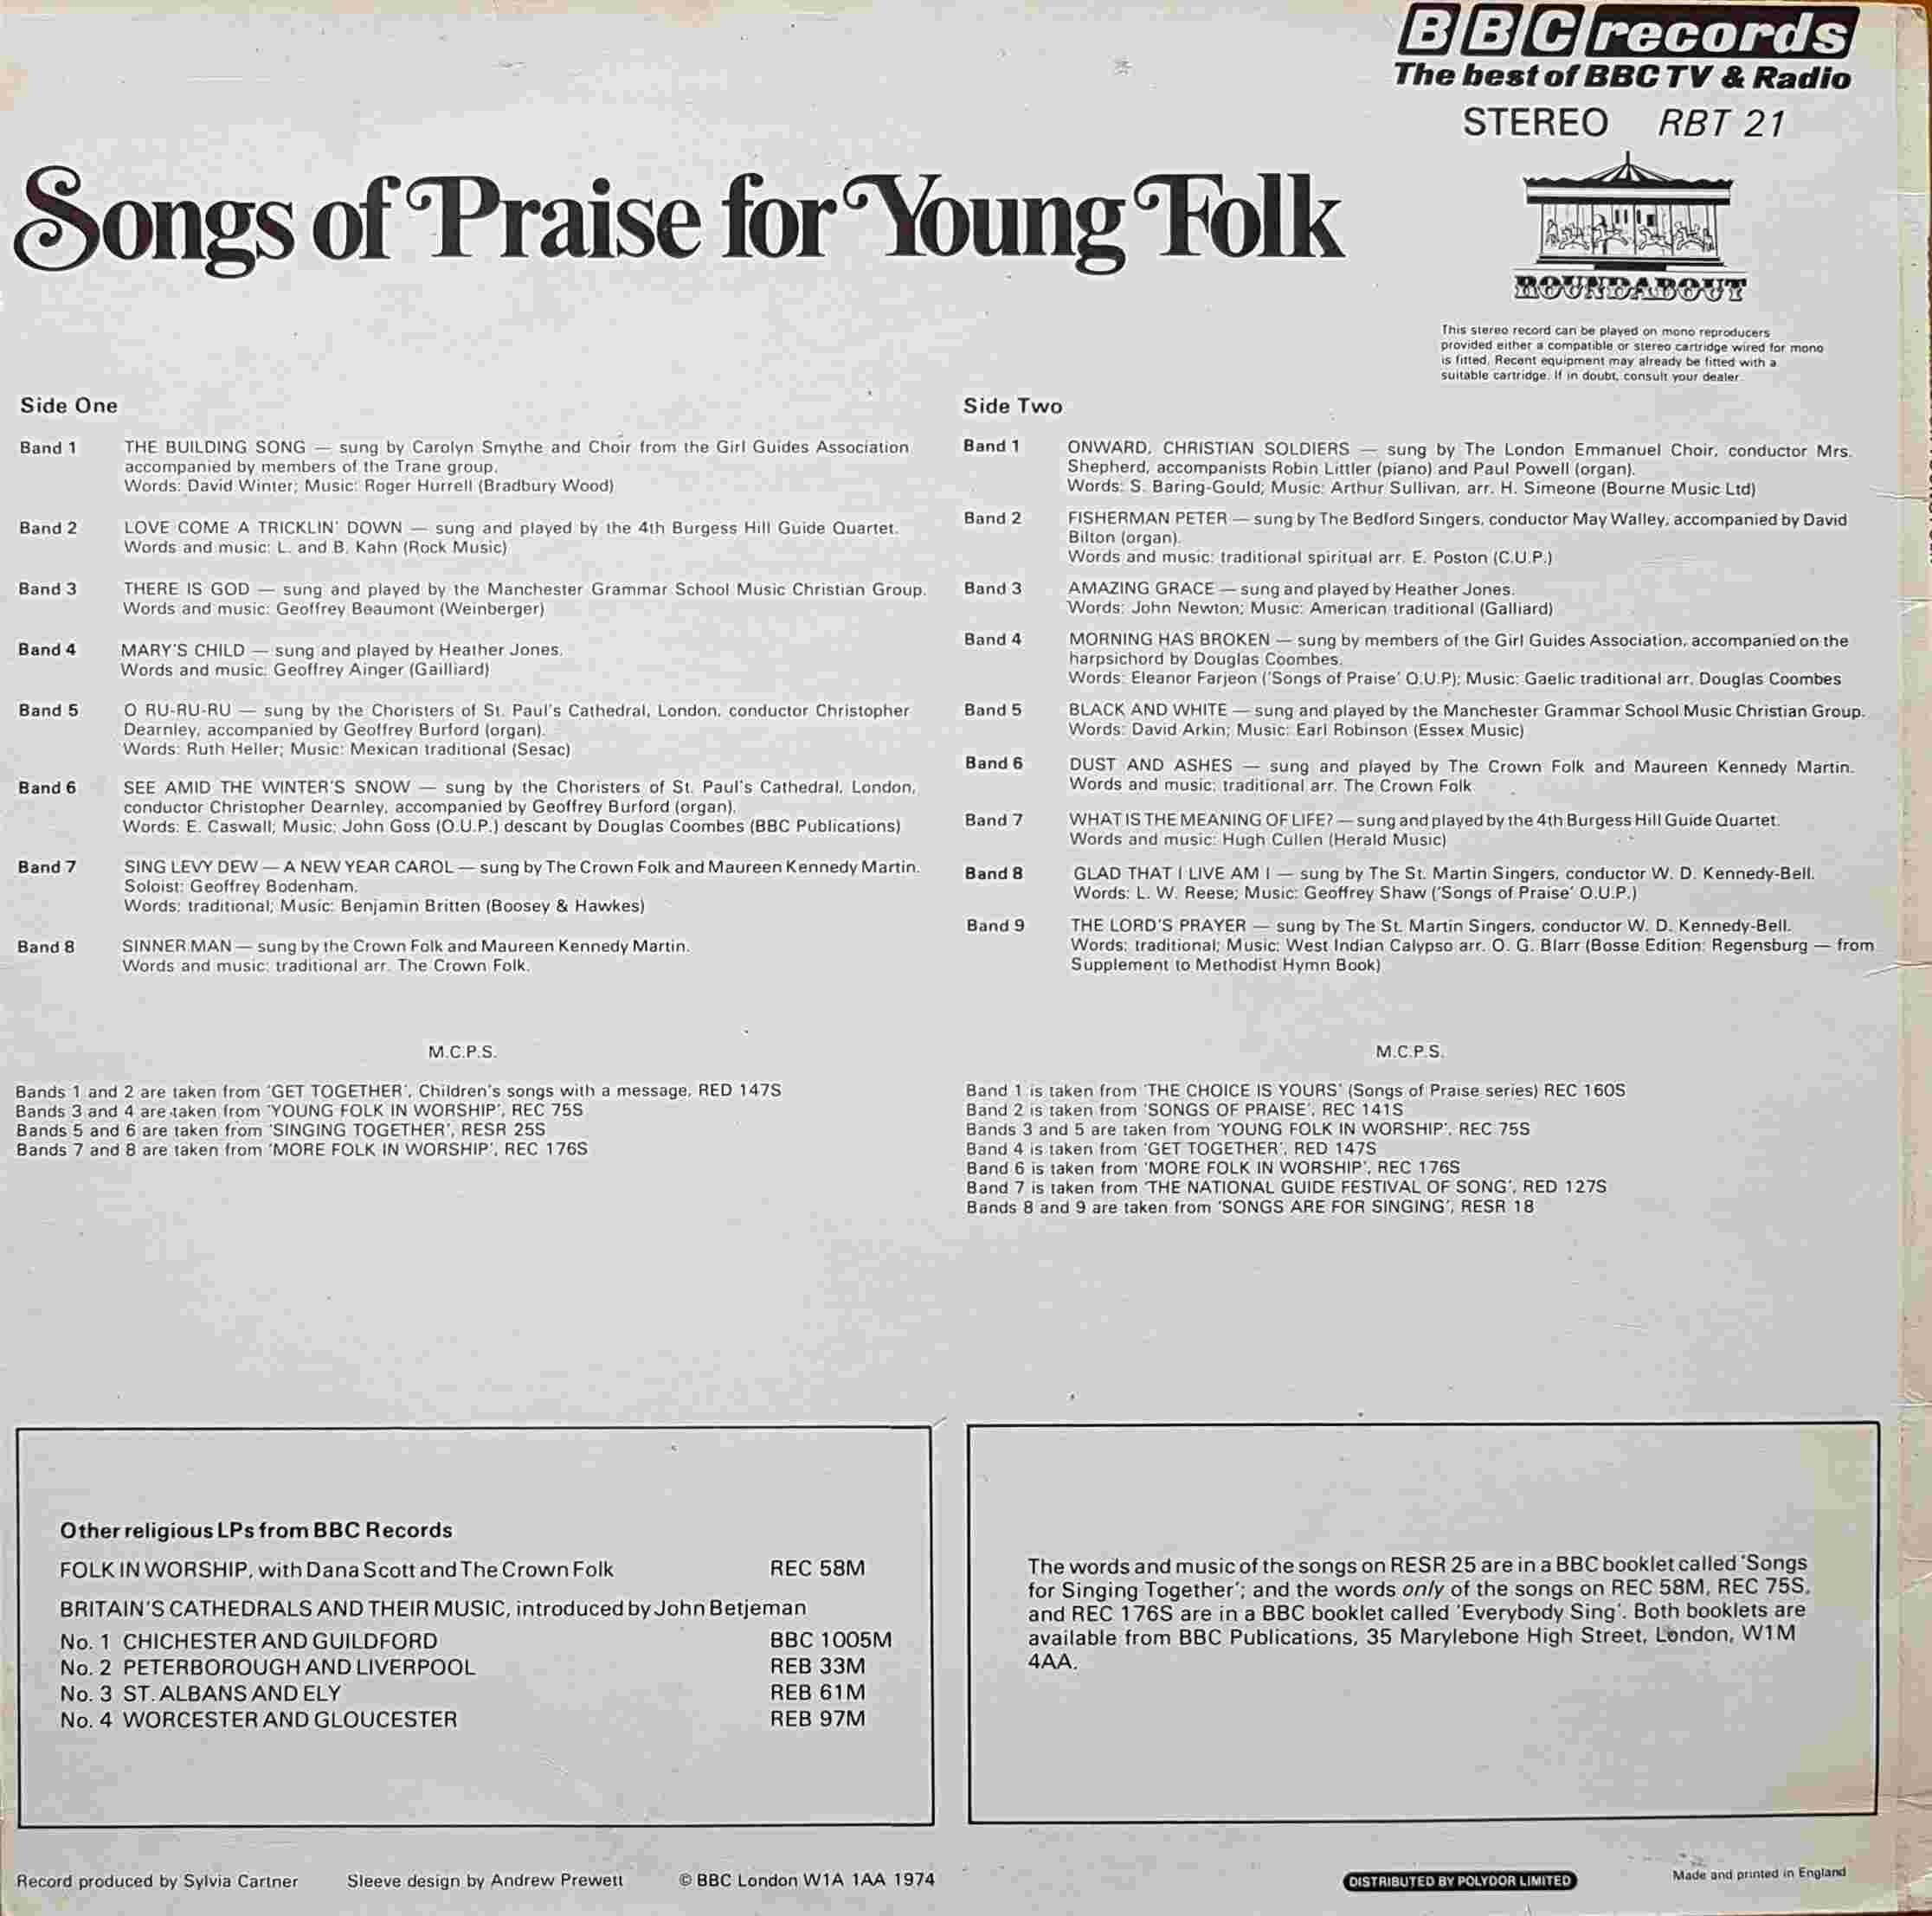 Picture of RBT 21 Songs of praise for young folk by artist Various from the BBC records and Tapes library